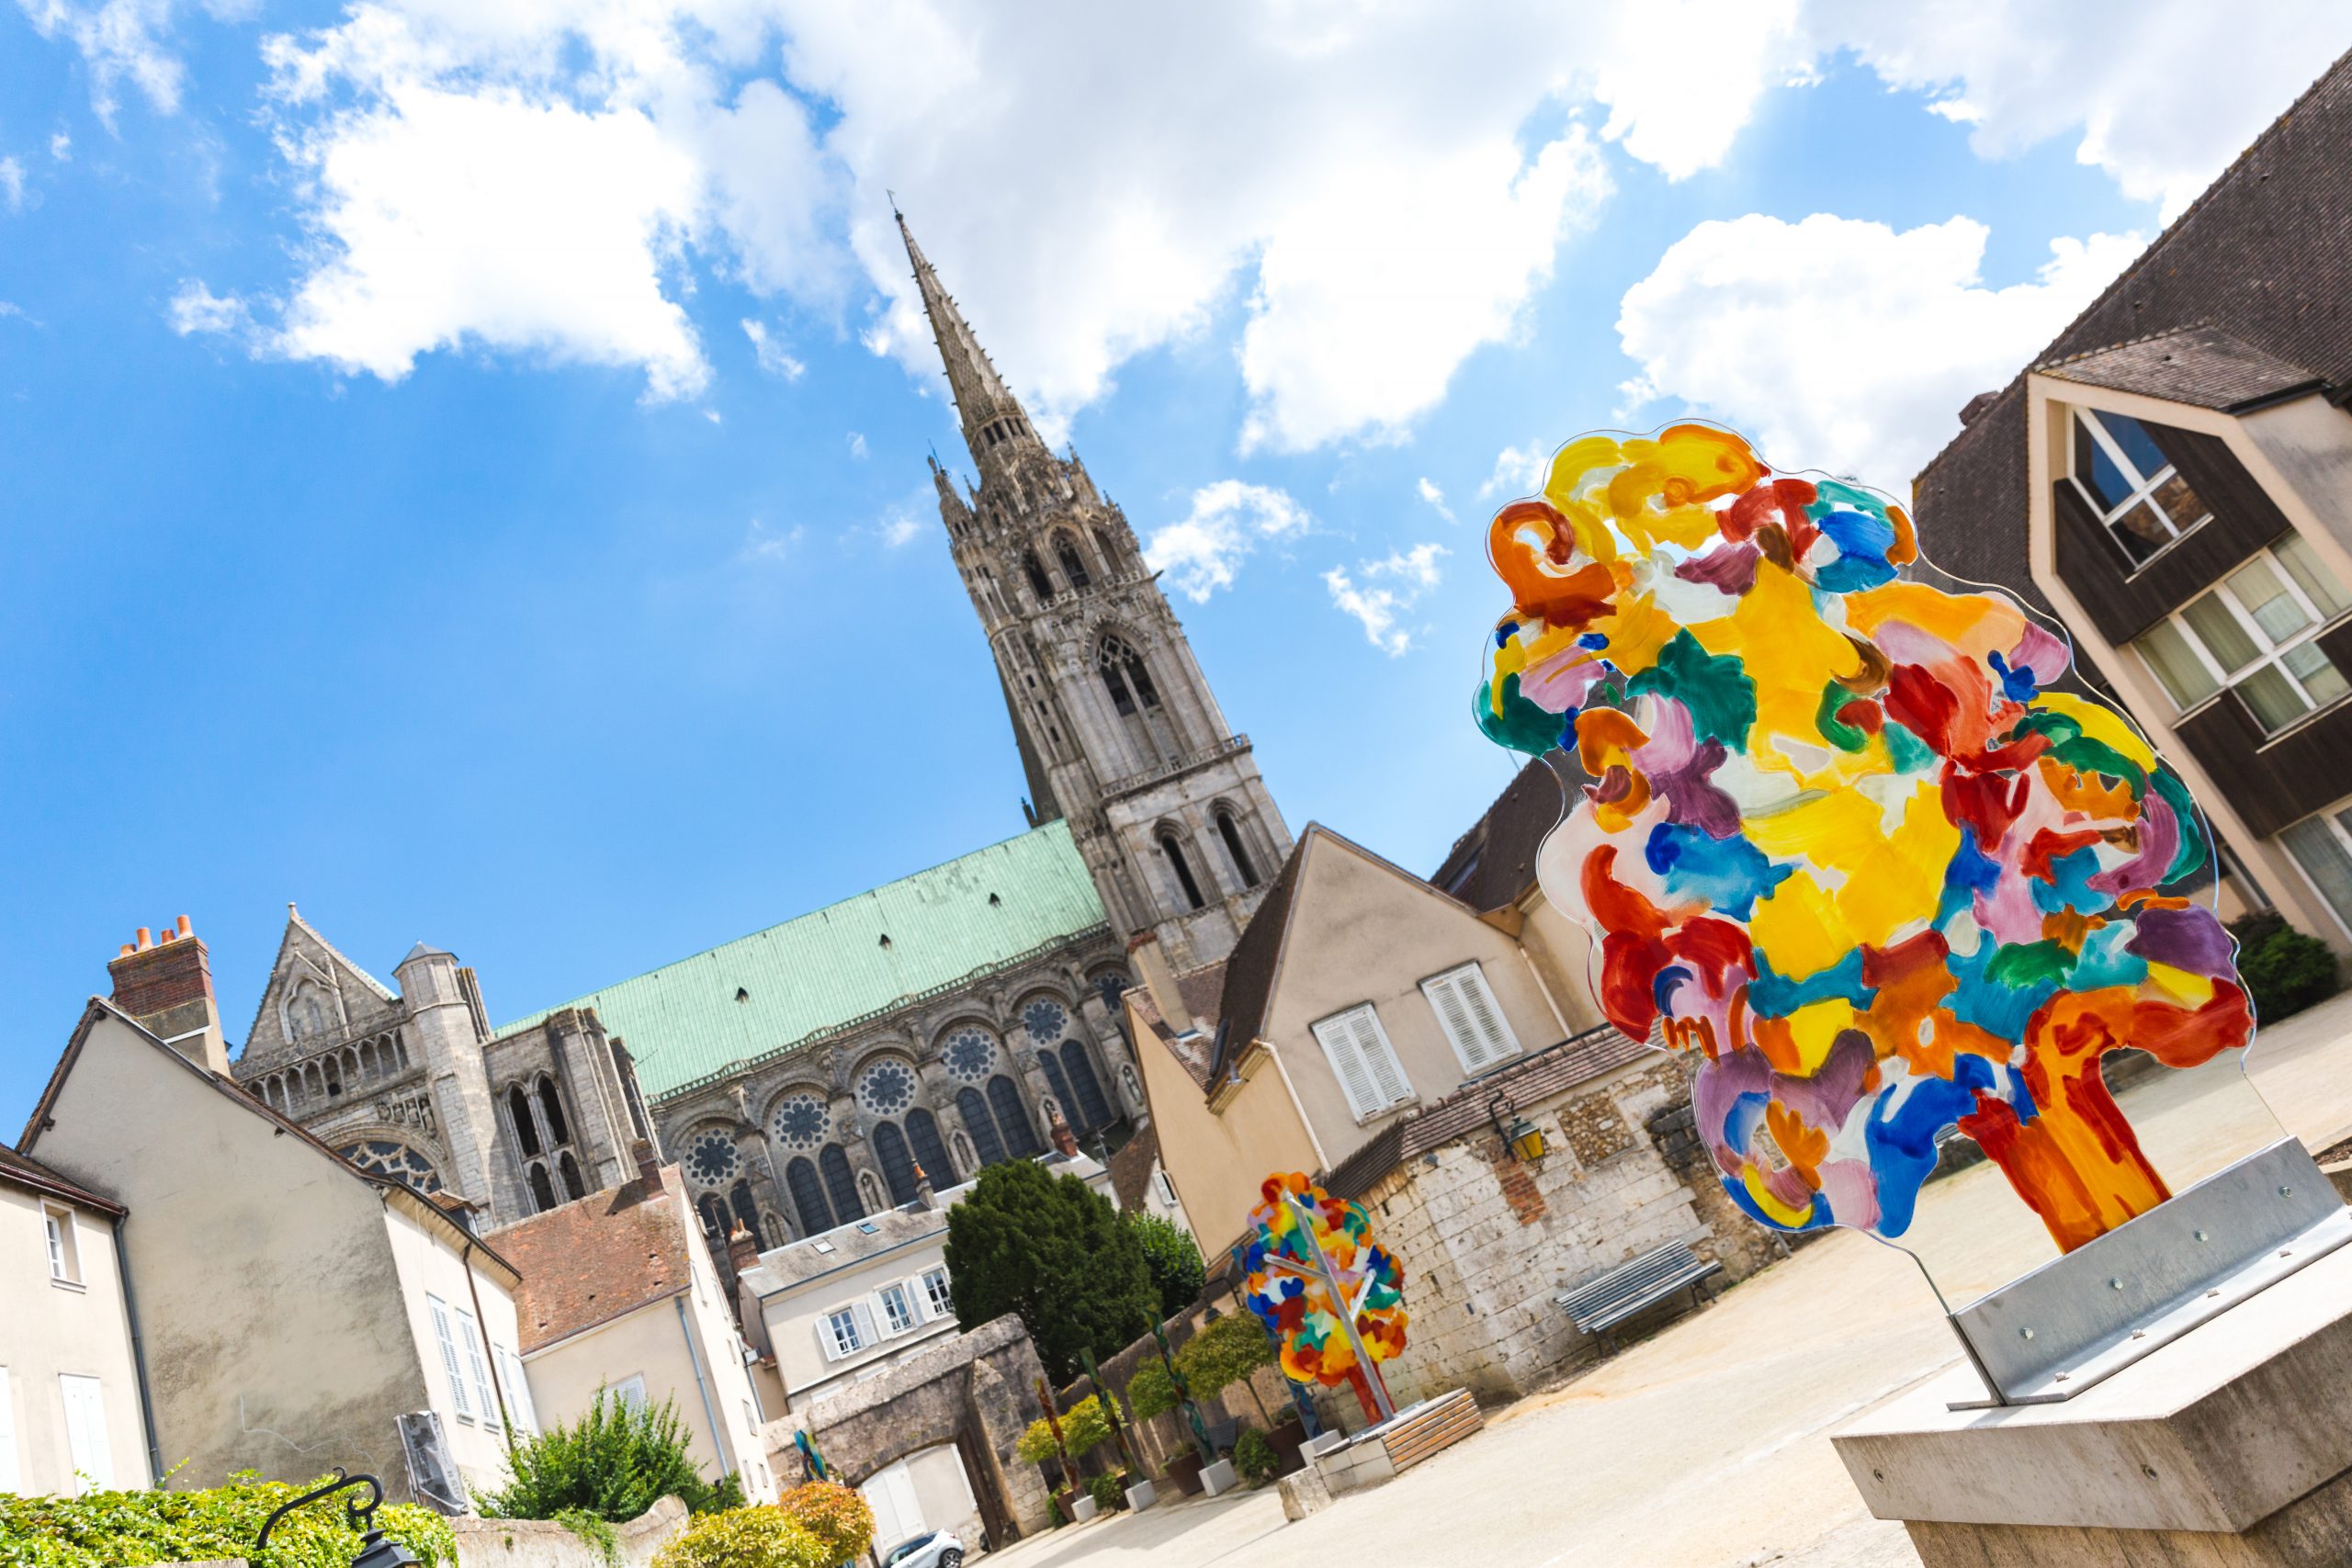 The Chartres Cathedral - Camping de Chartres